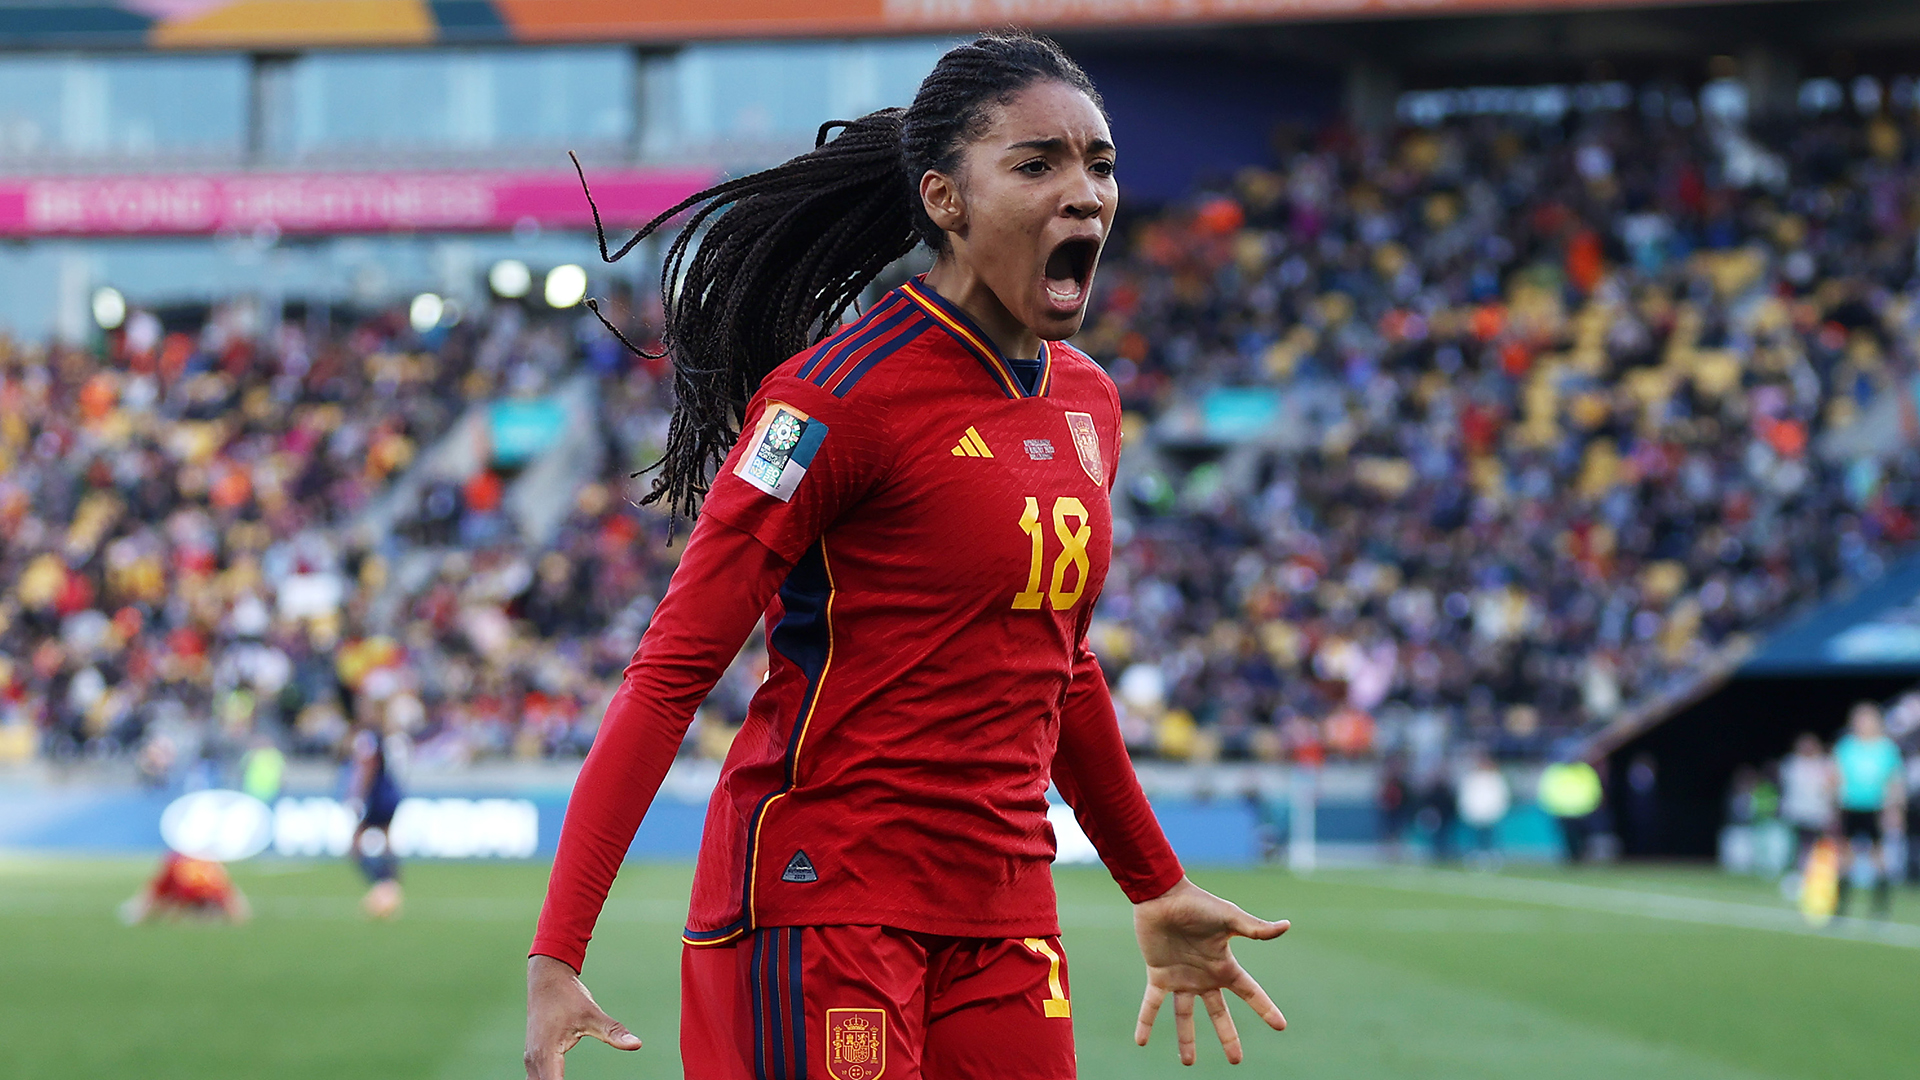 Salma Paralluelo Shook The Netherlands Out Of The World Cup